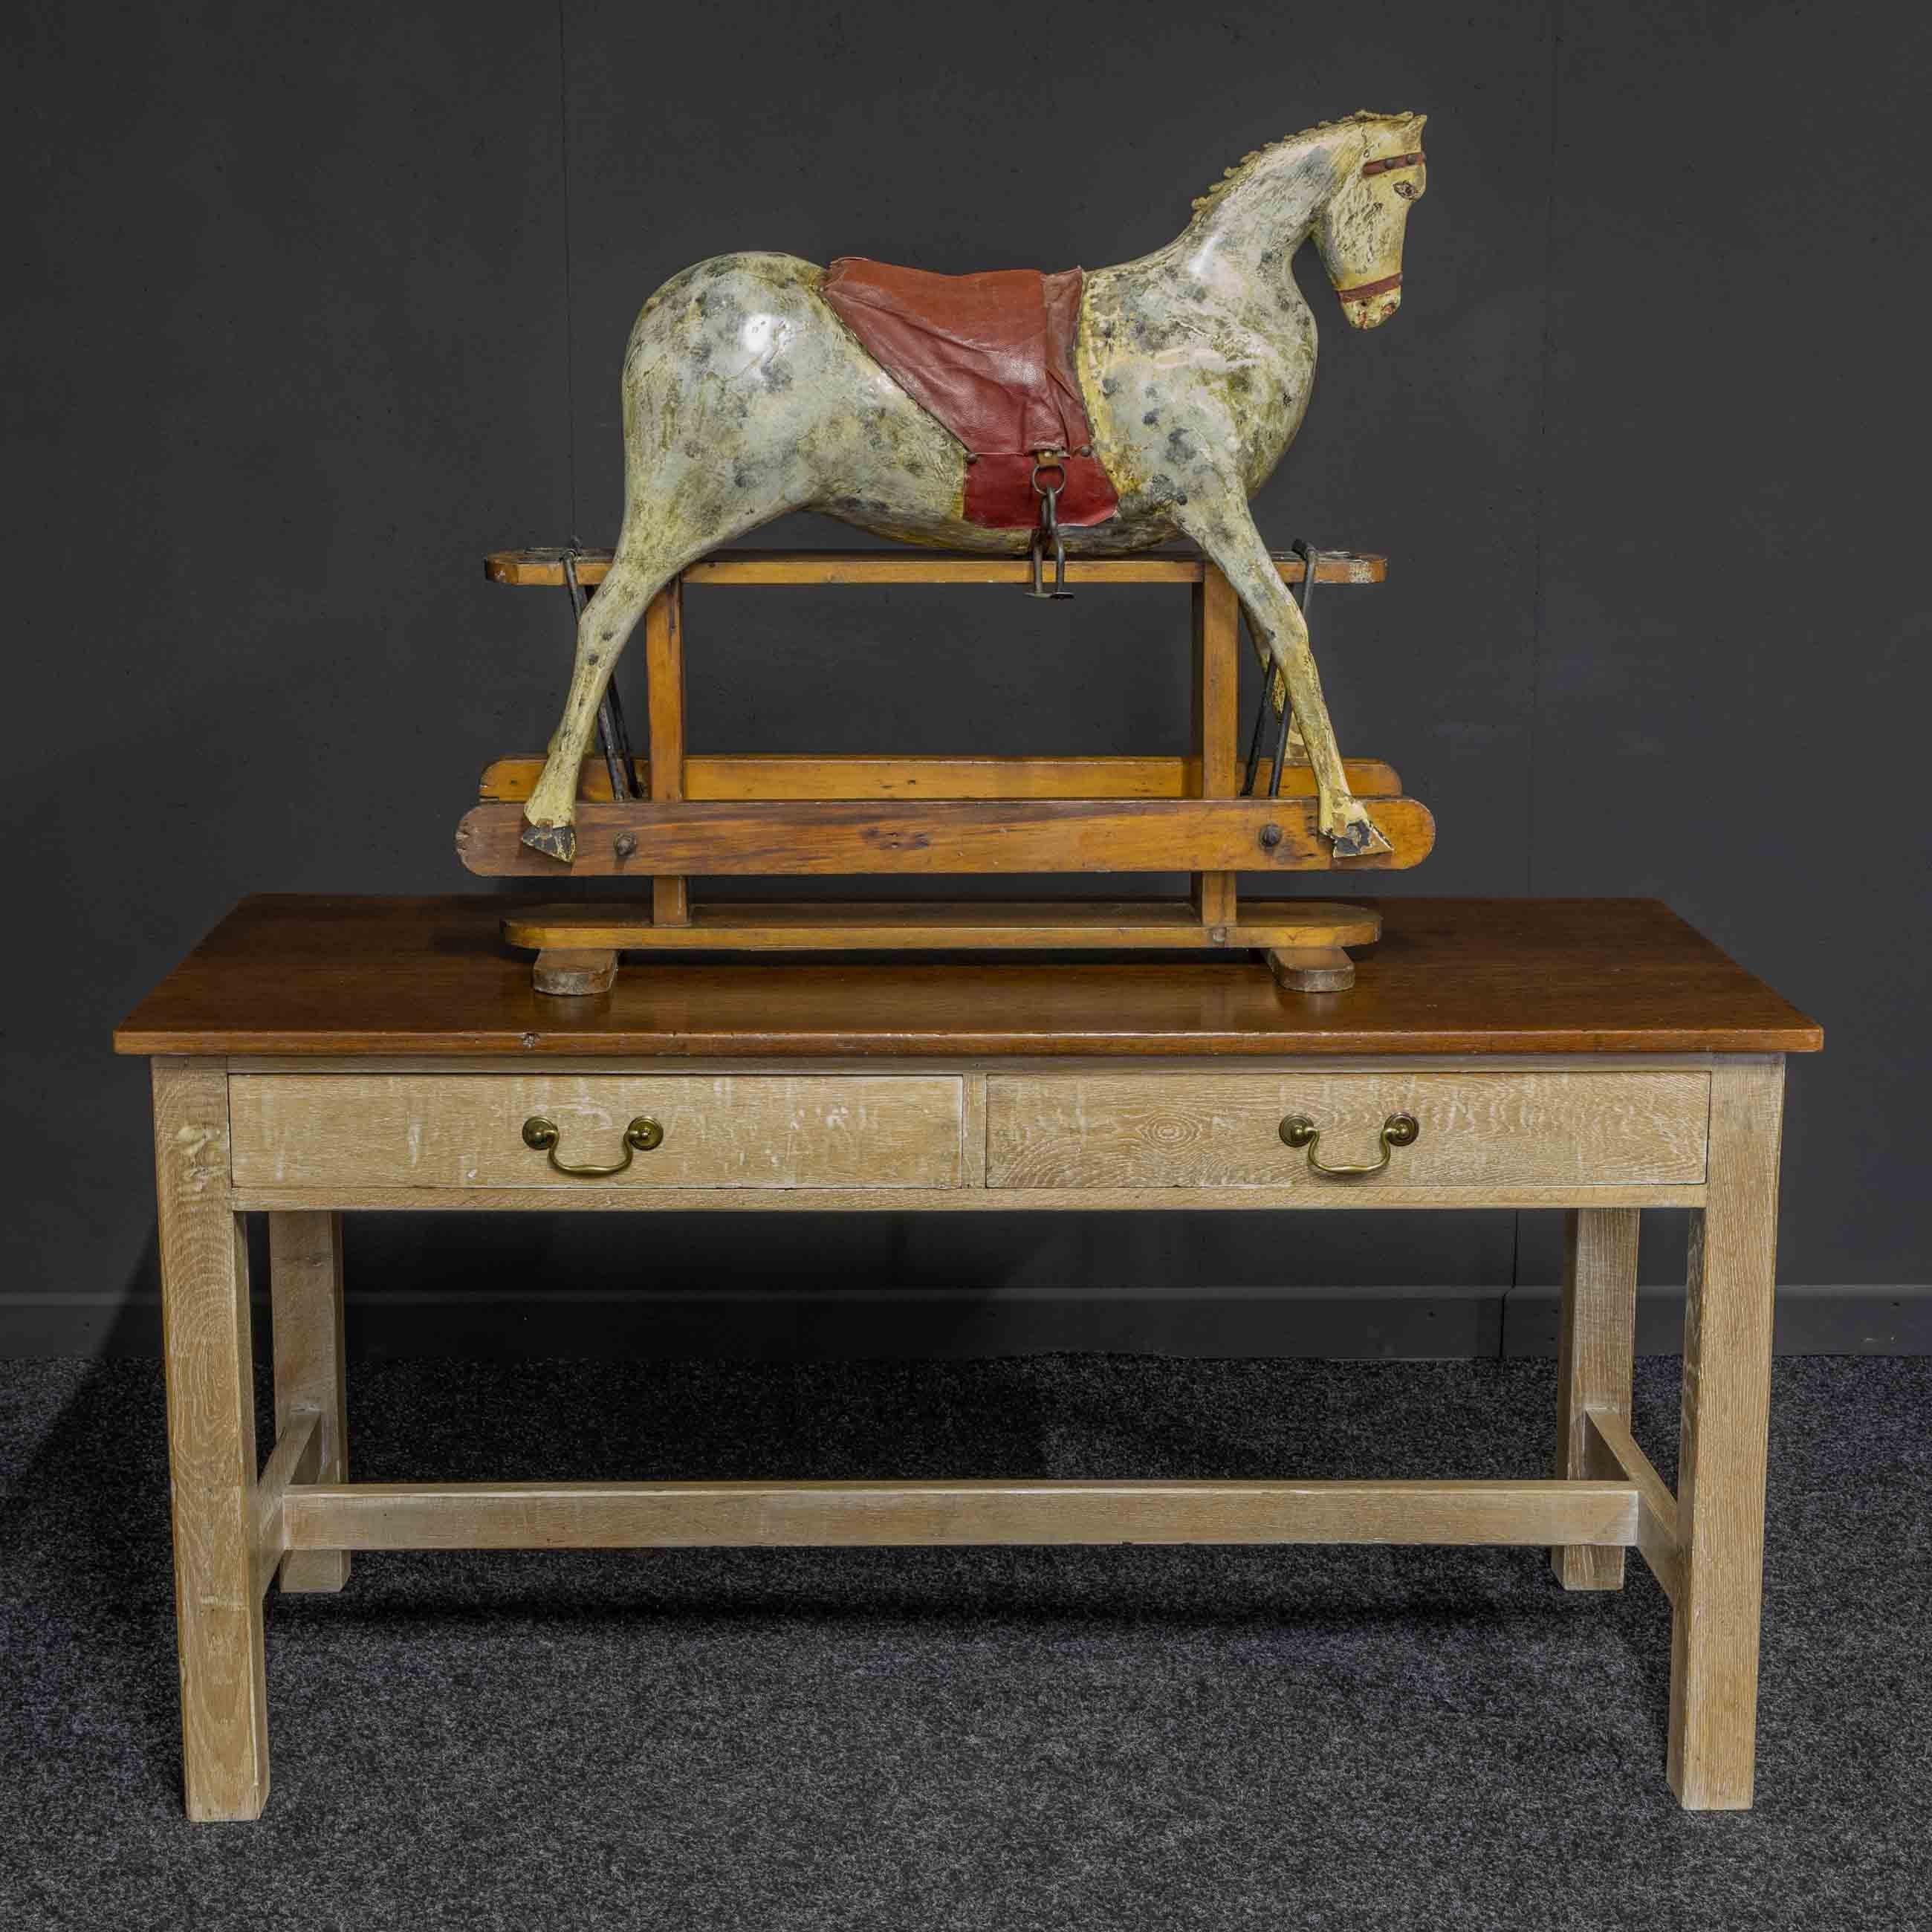 A most interesting and rare rocking horse that appears to be homemade and an attempt to copy an 18th century horse portrait. Hence the small head and large body. The actual construction of the horse and stand is very good and make us think that this